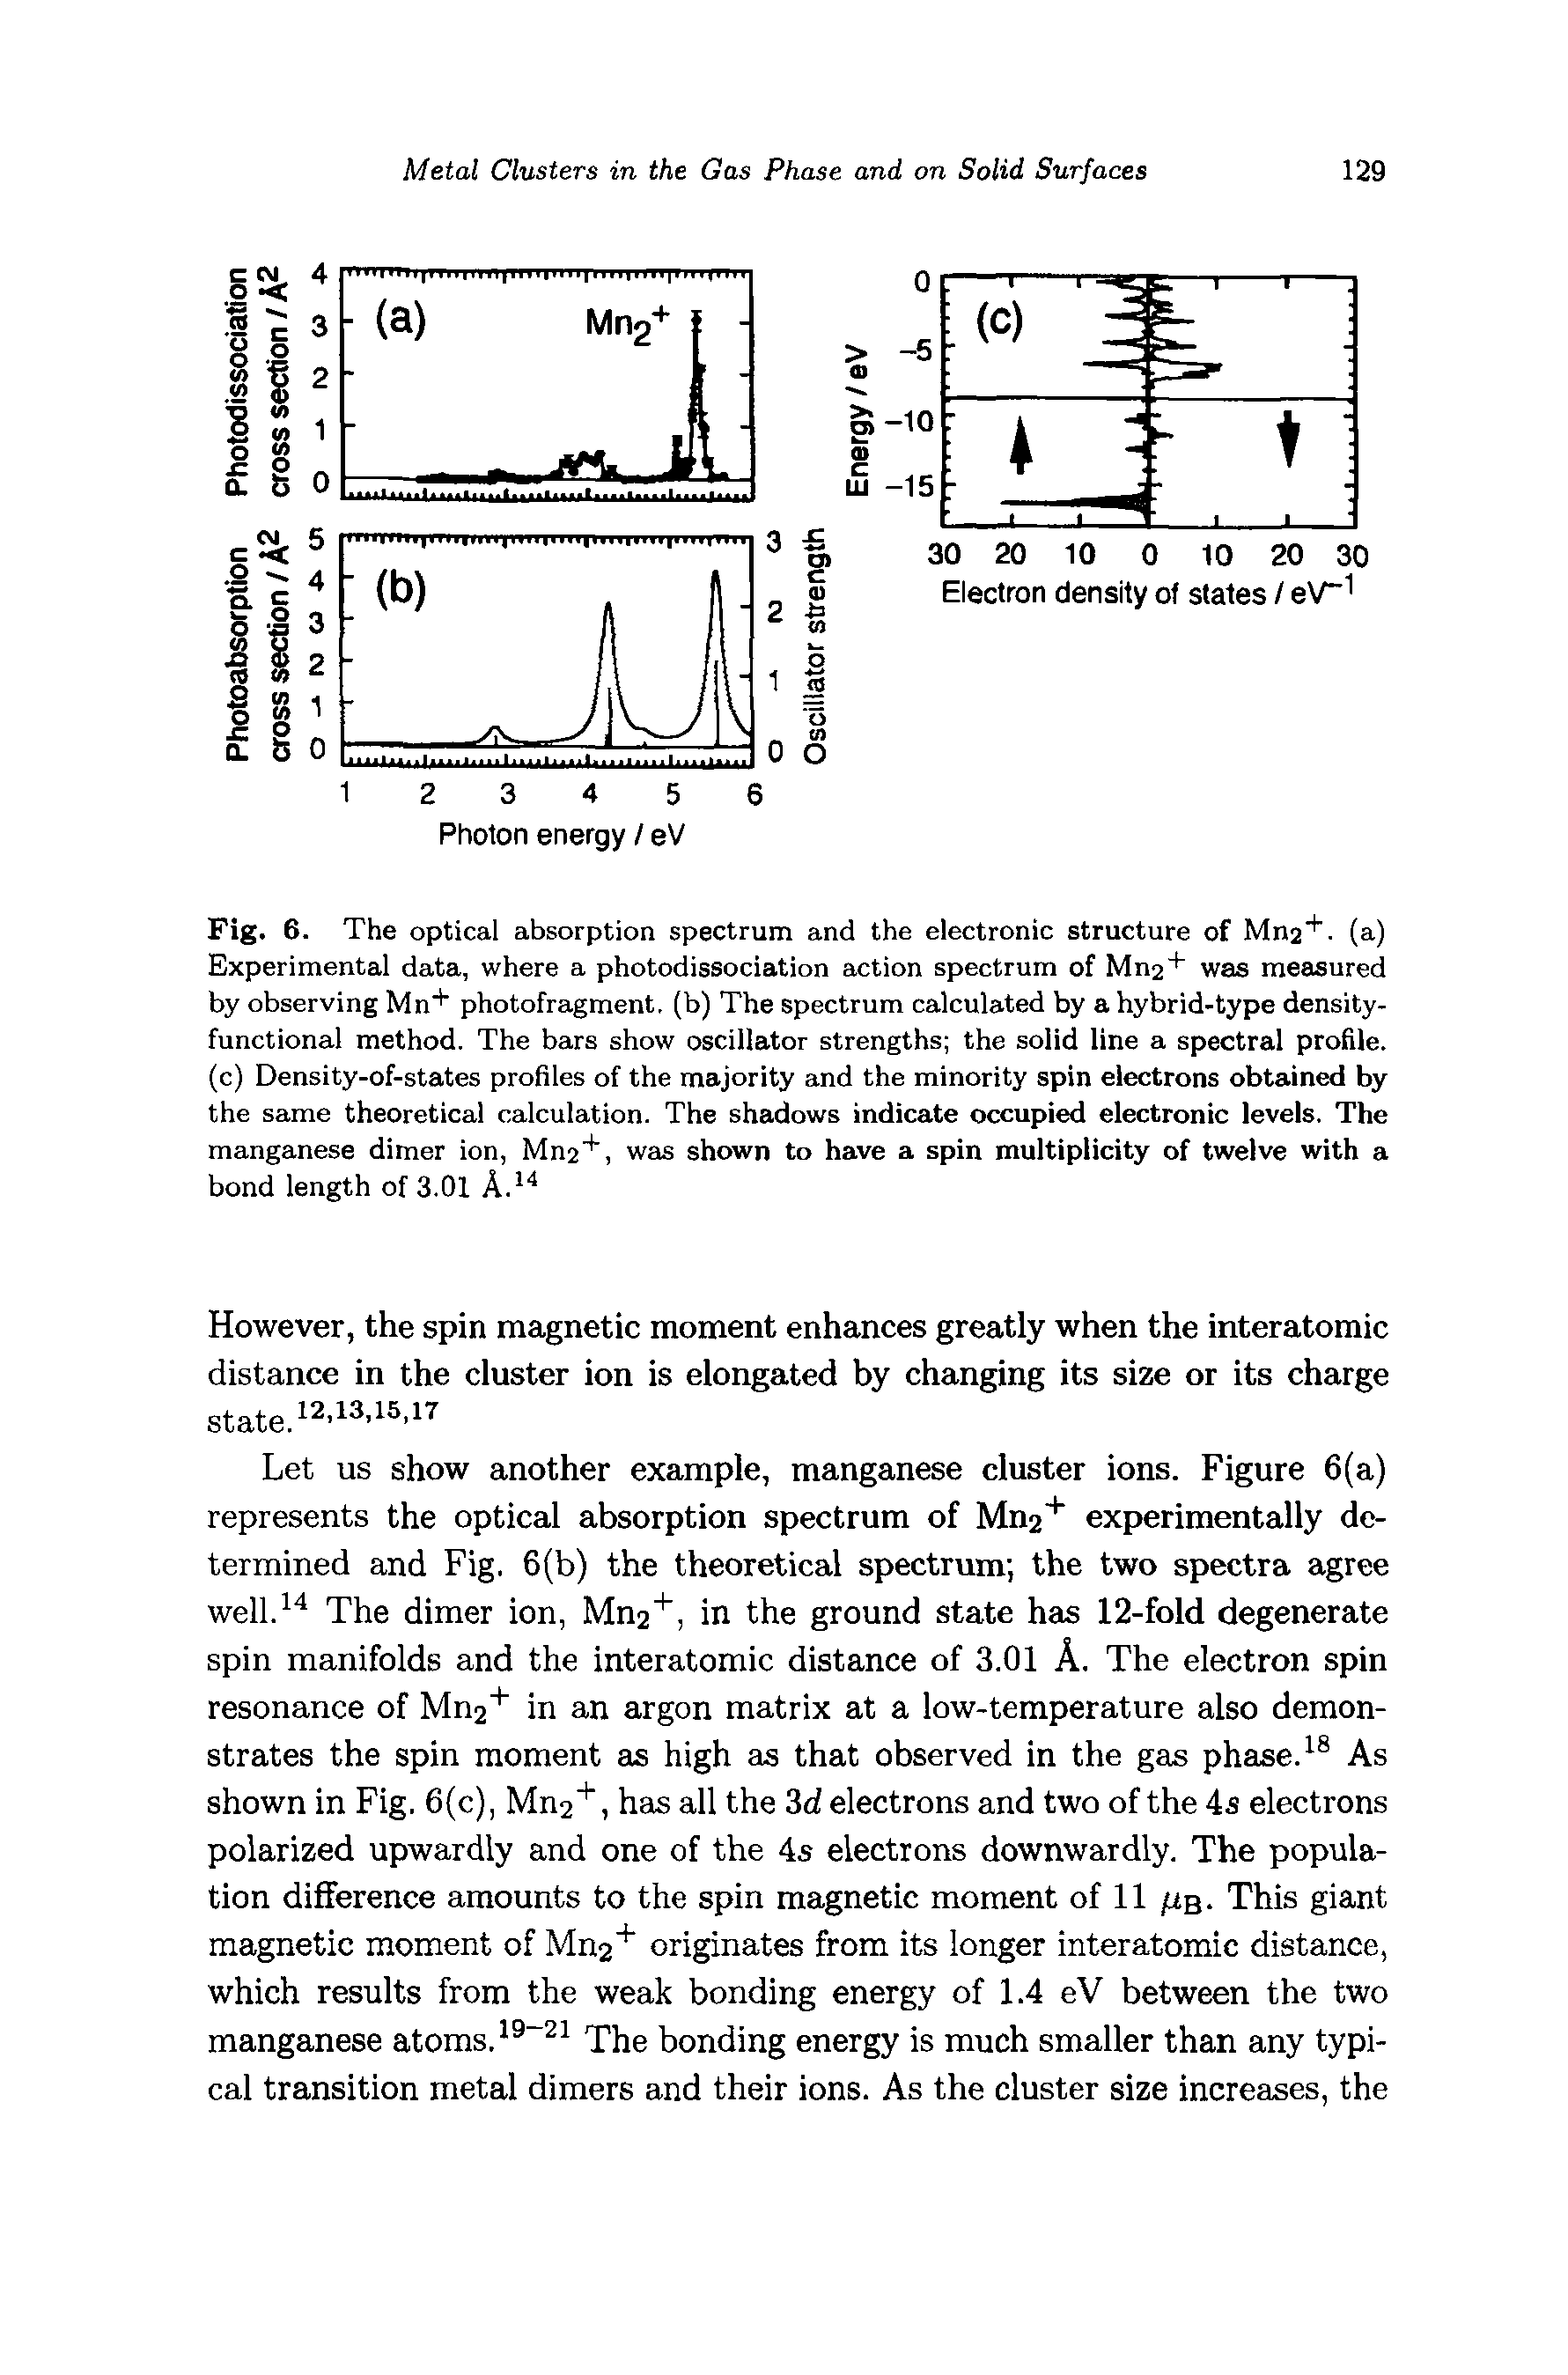 Fig. 6. The optical absorption spectrum and the electronic structure of Mn2". (a) Experimental data, where a photodissociation action spectrum of Mn2 was measured by observing Mn" " photofragment, (b) The spectrum calculated by a hybrid-type density-functional method. The bars show oscillator strengths the solid line a spectral profile, (c) Density-of-states profiles of the majority and the minority spin electrons obtained by the same theoretical calculation. The shadows indicate occupied electronic levels. The manganese dimer ion, Mn2 ", was shown to have a spin multiplicity of twelve with a bond length of 3.01 A. ...